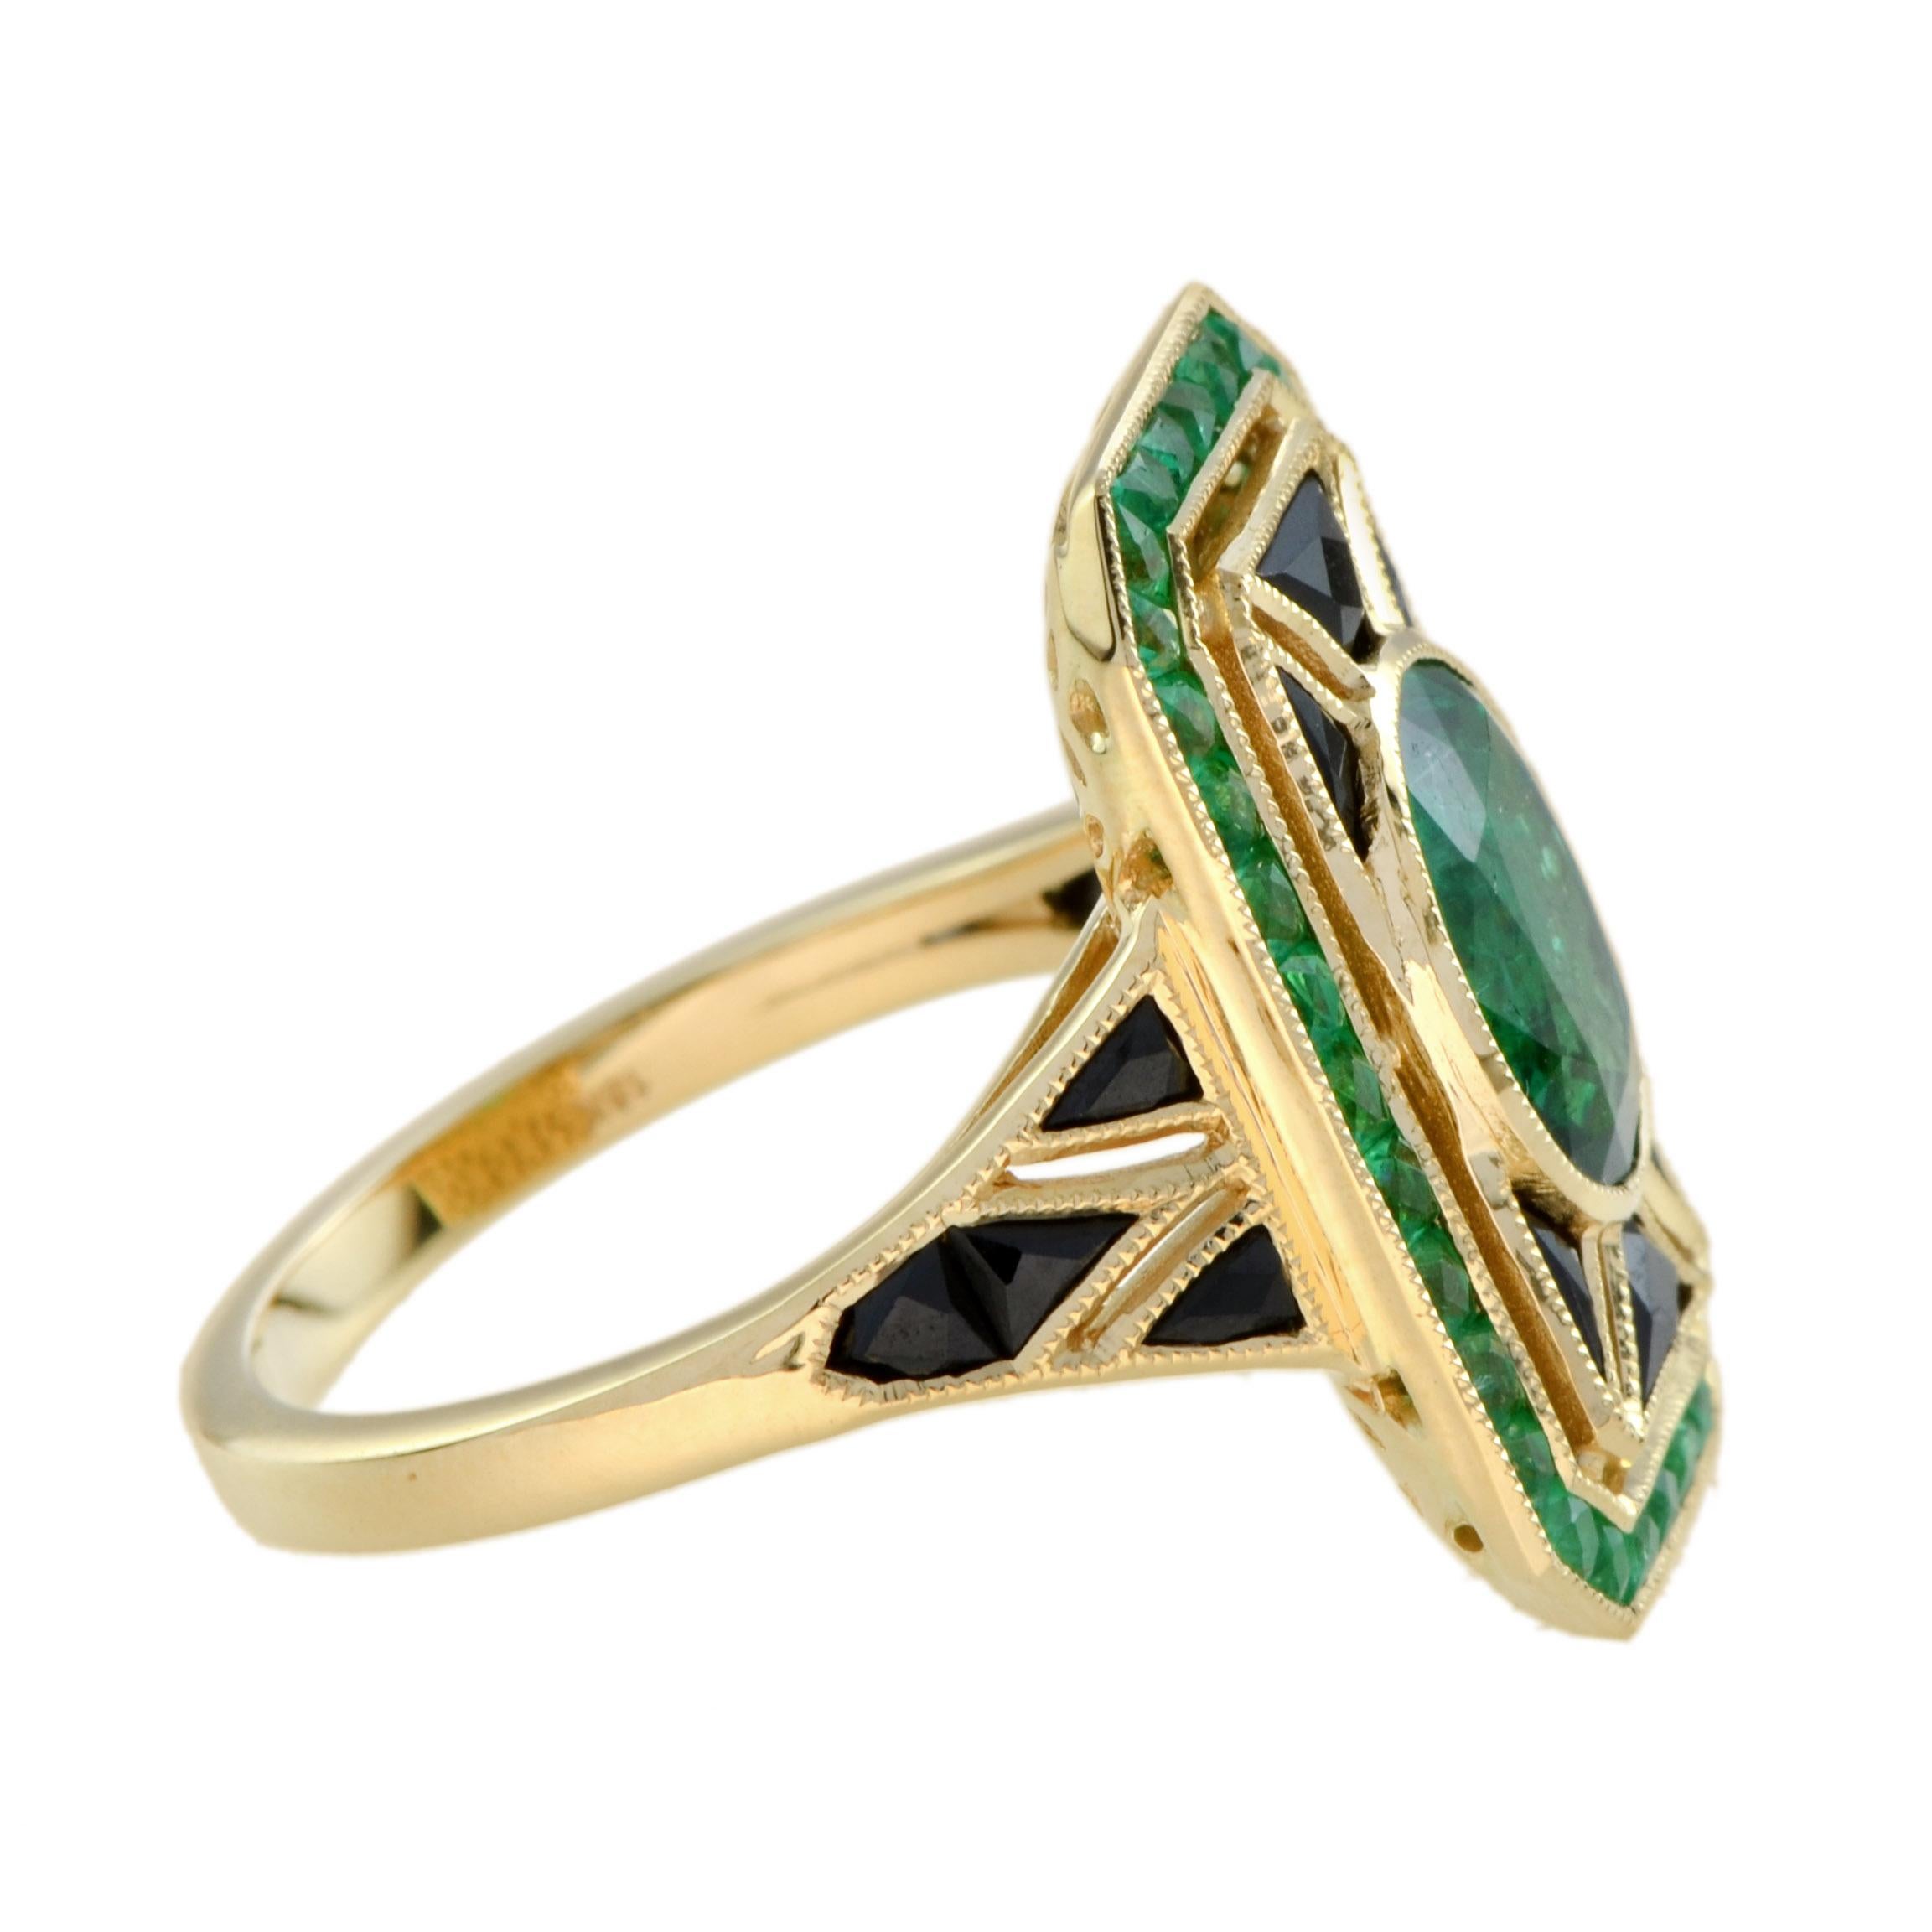 Women's or Men's Emerald and Onyx Art Deco Style Ring in 18k Yellow Gold